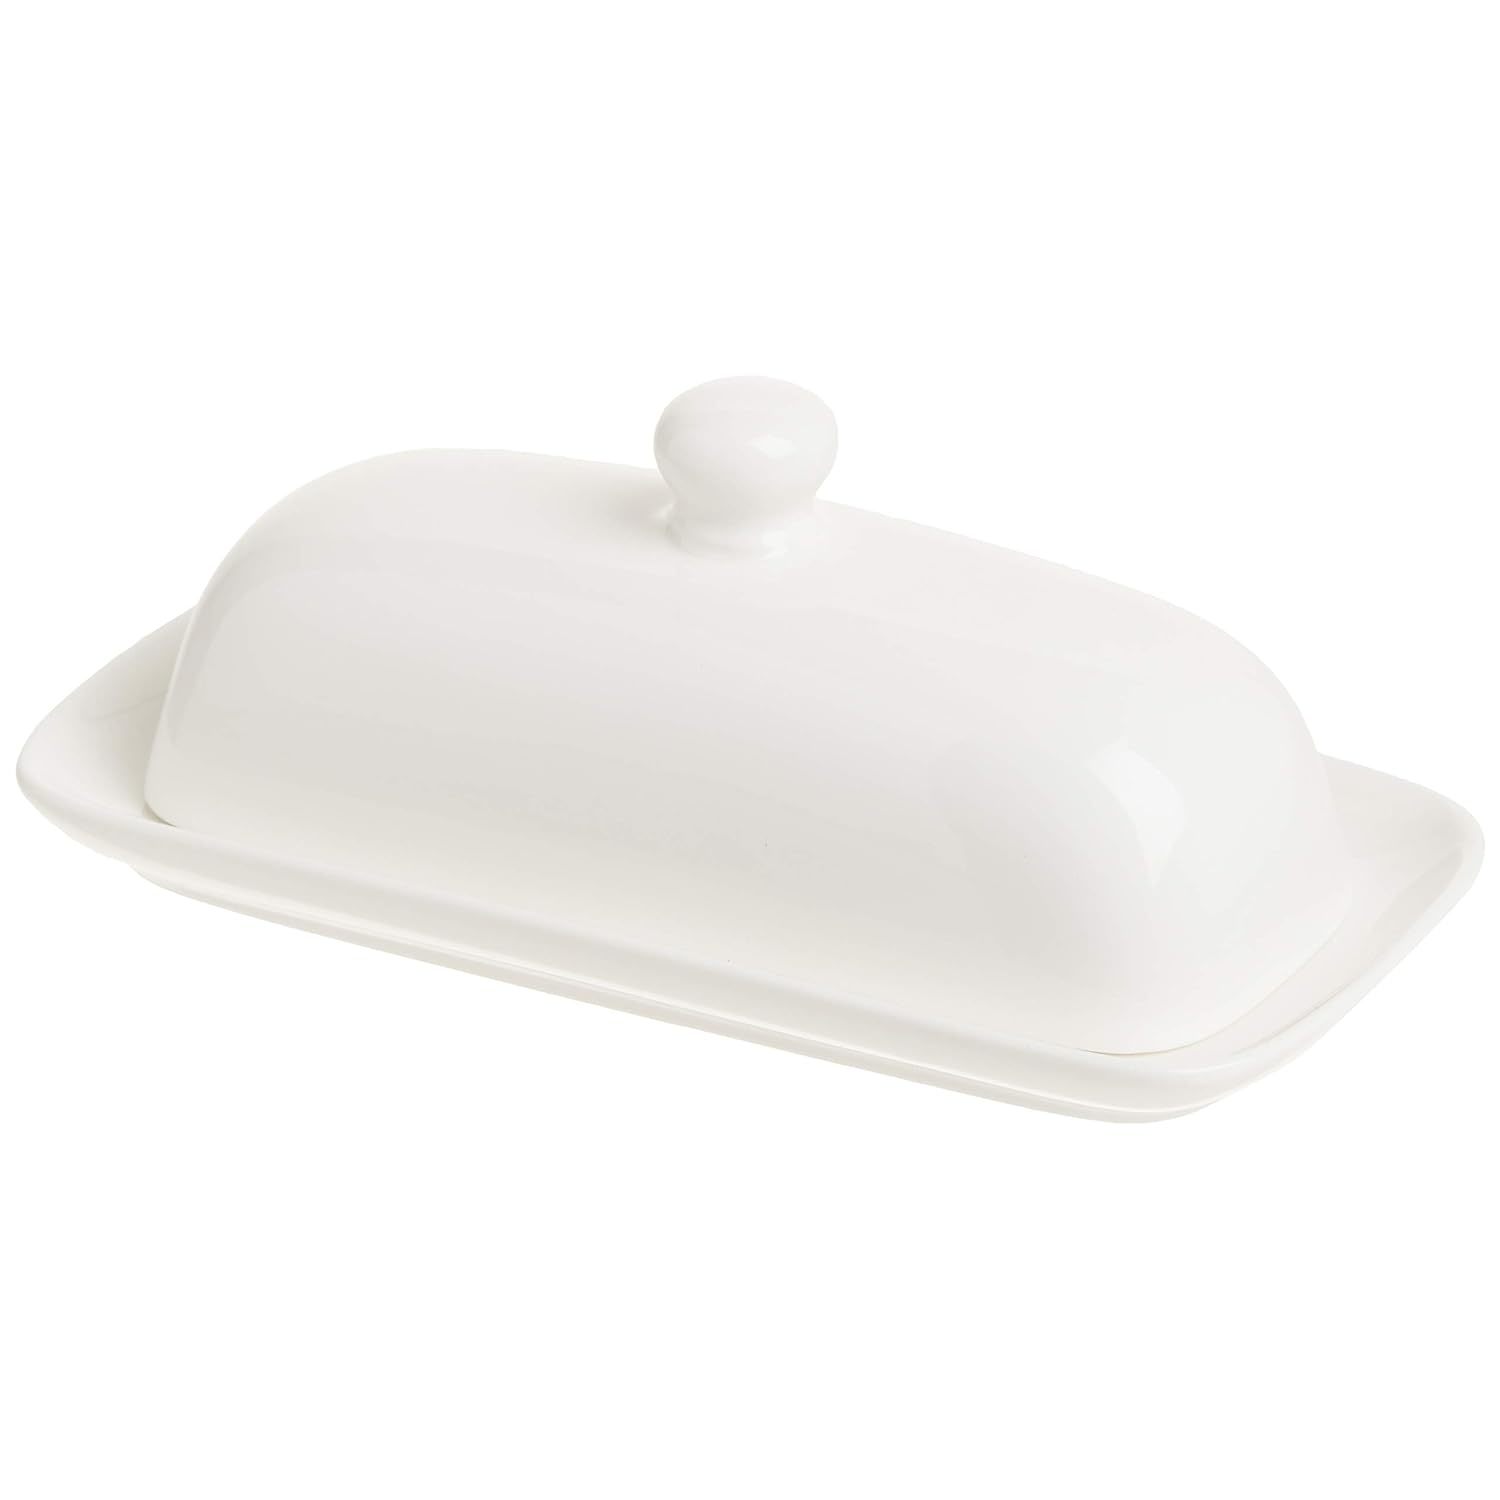 Norpro 8370 Butter Dish, one, White - $27.99